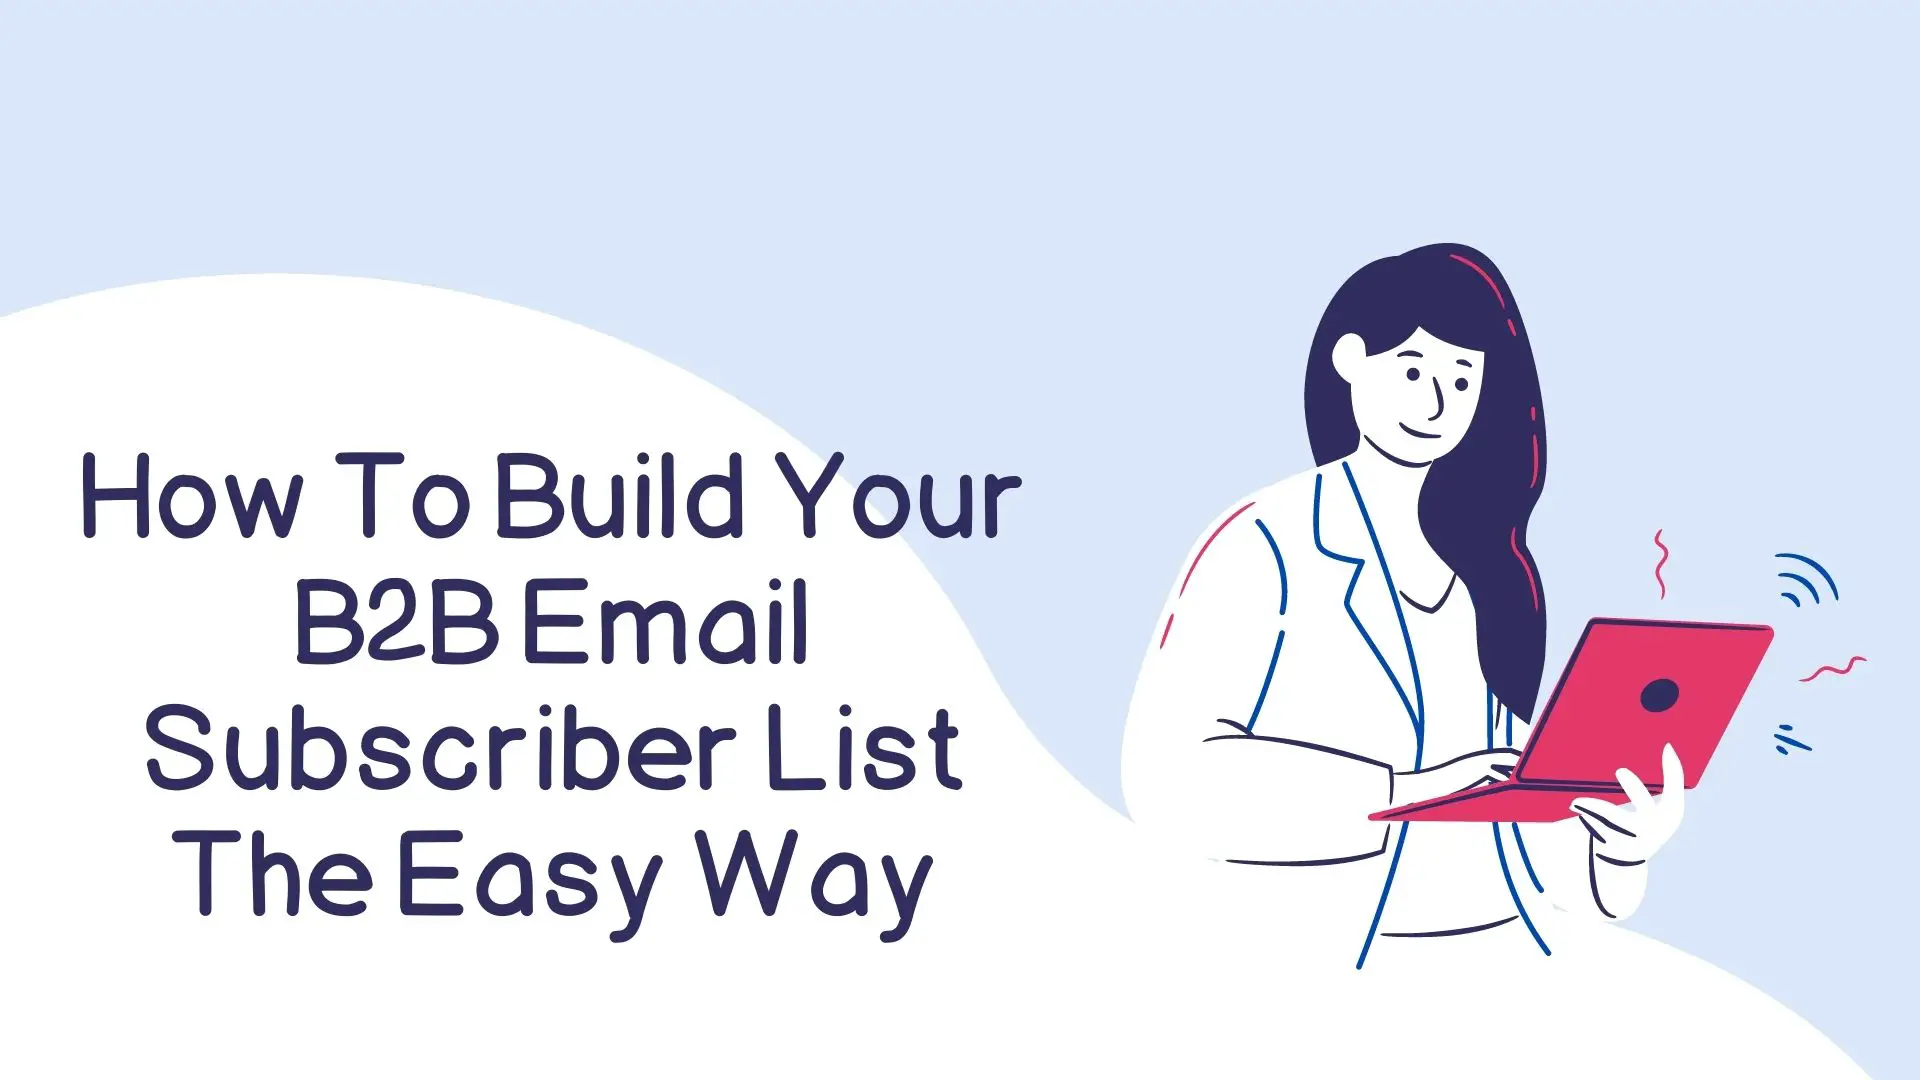 How To Build Your B2B Email Subscriber List The Easy Way